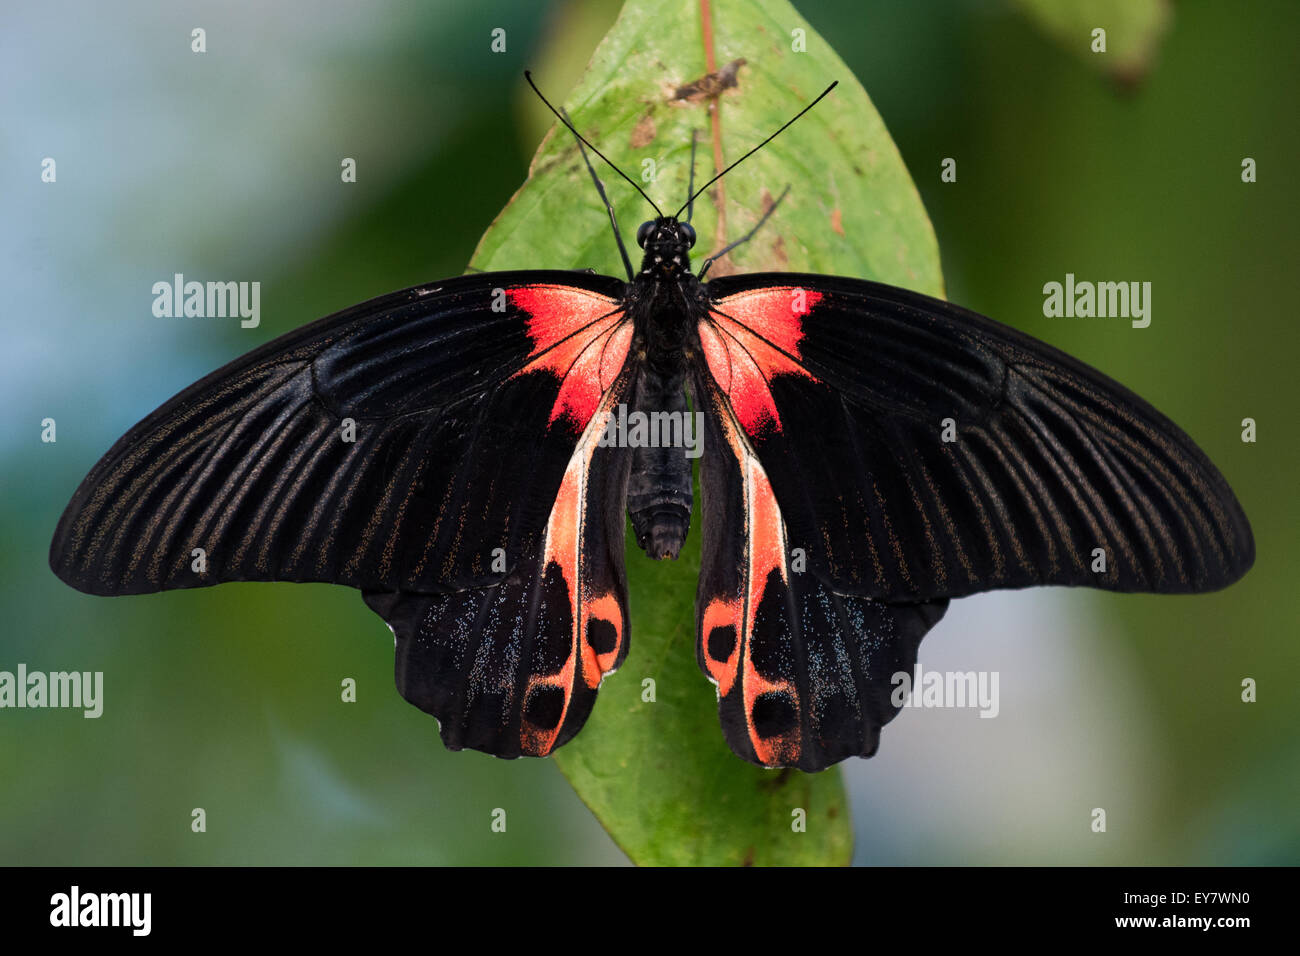 Scarlet / red mormon (papilio rumanzovi) butterfly, tropical butterfly house, United Kingdom Stock Photo